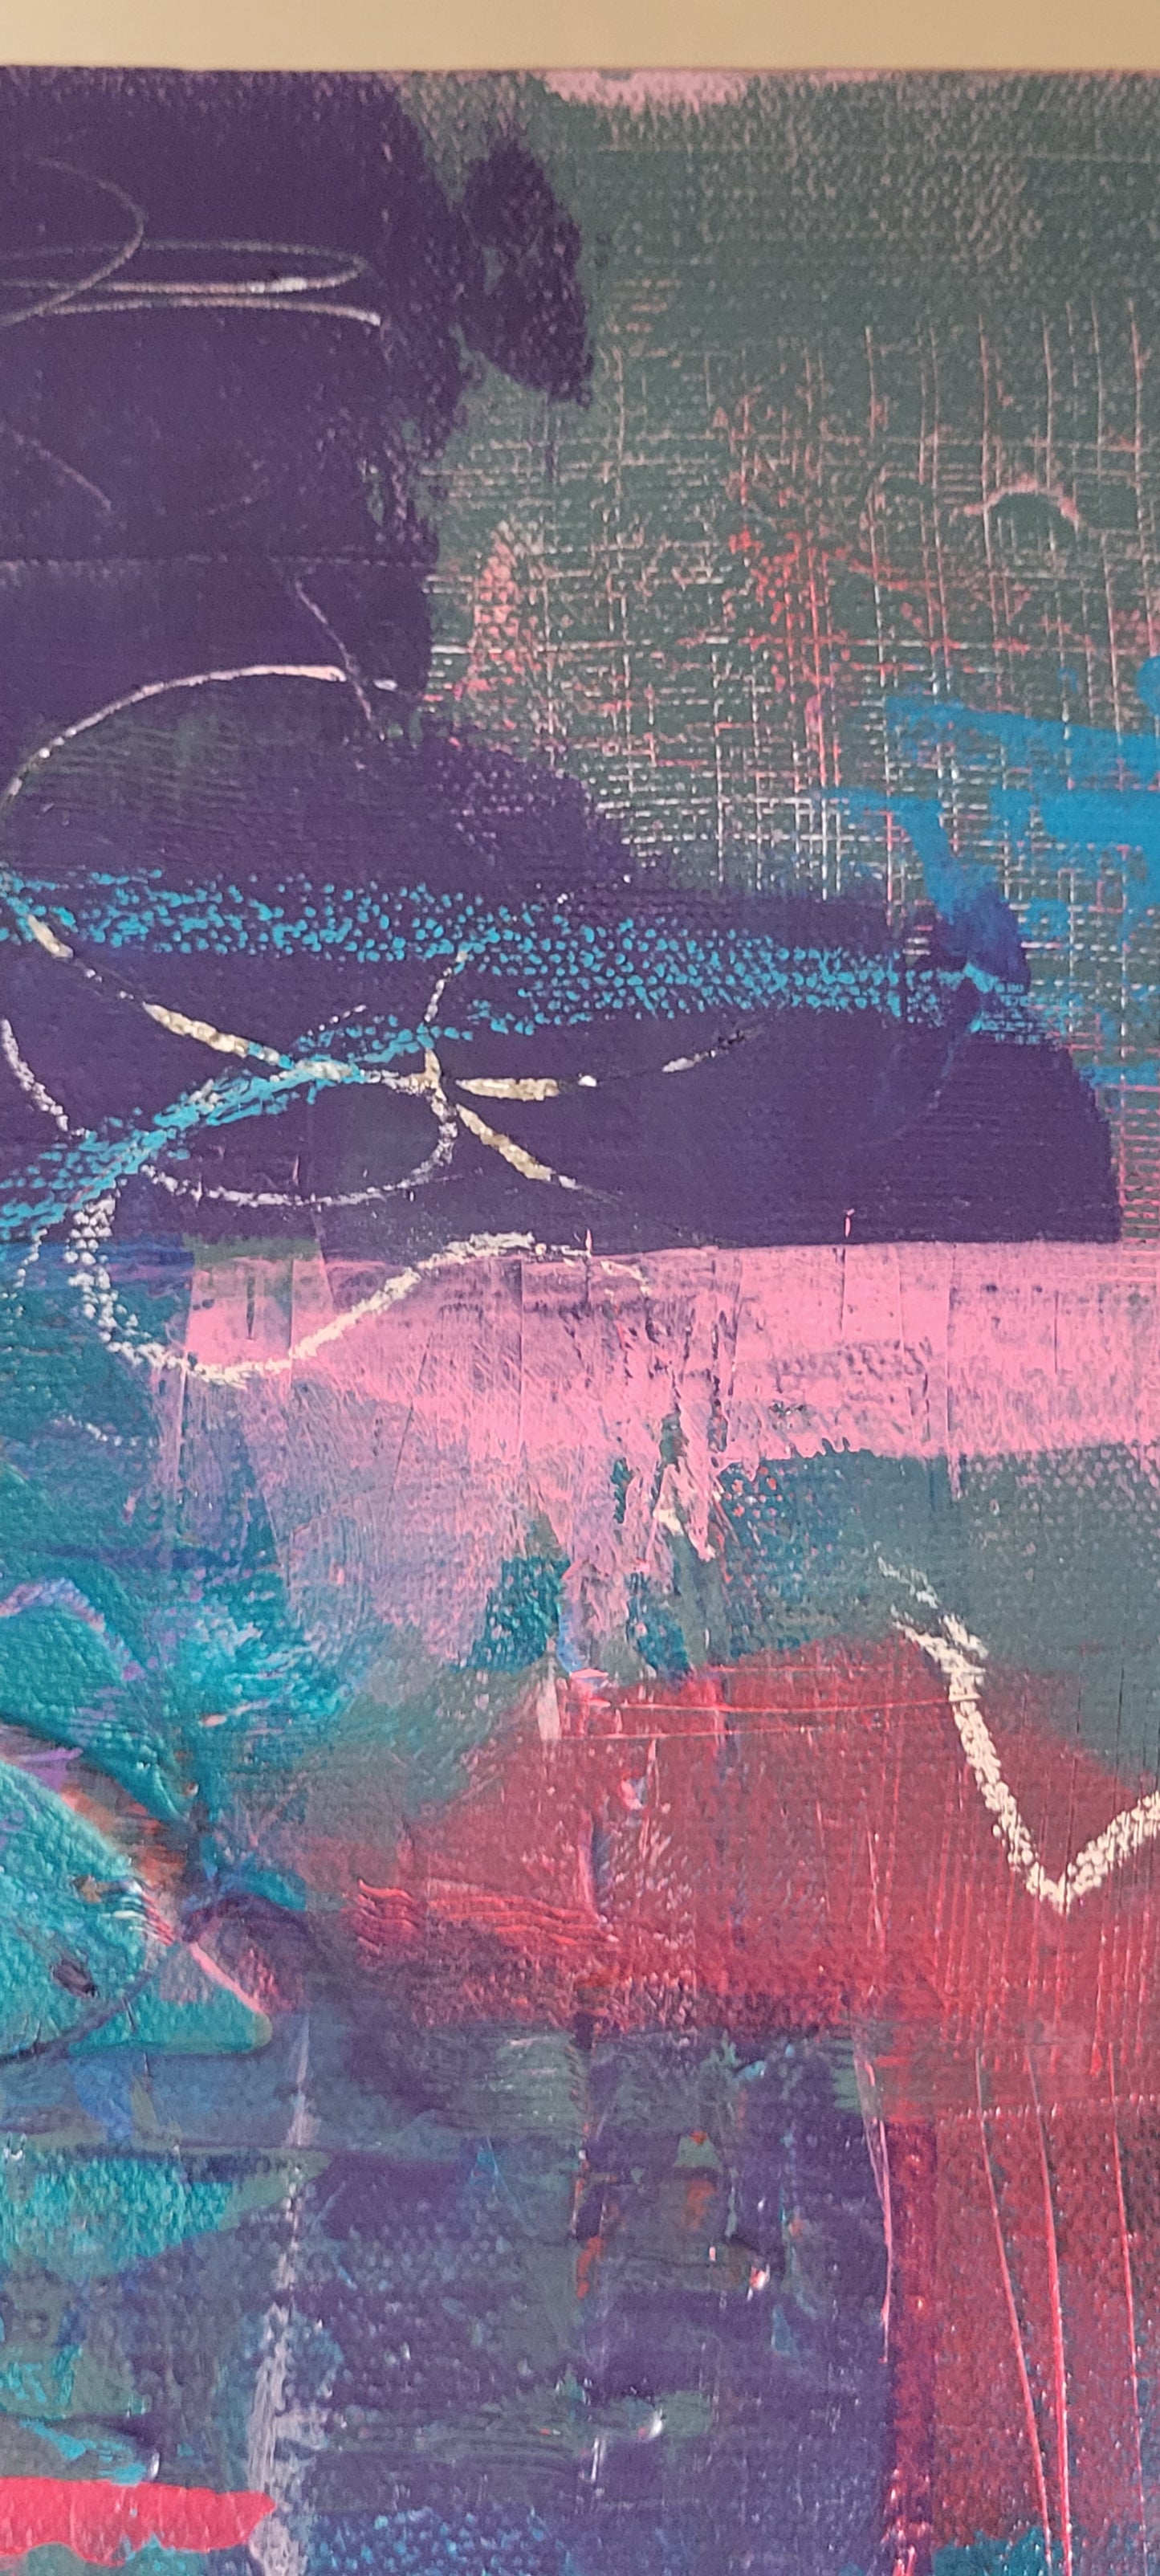 Detail shows textured pattern, oil pastel marks, and texture.